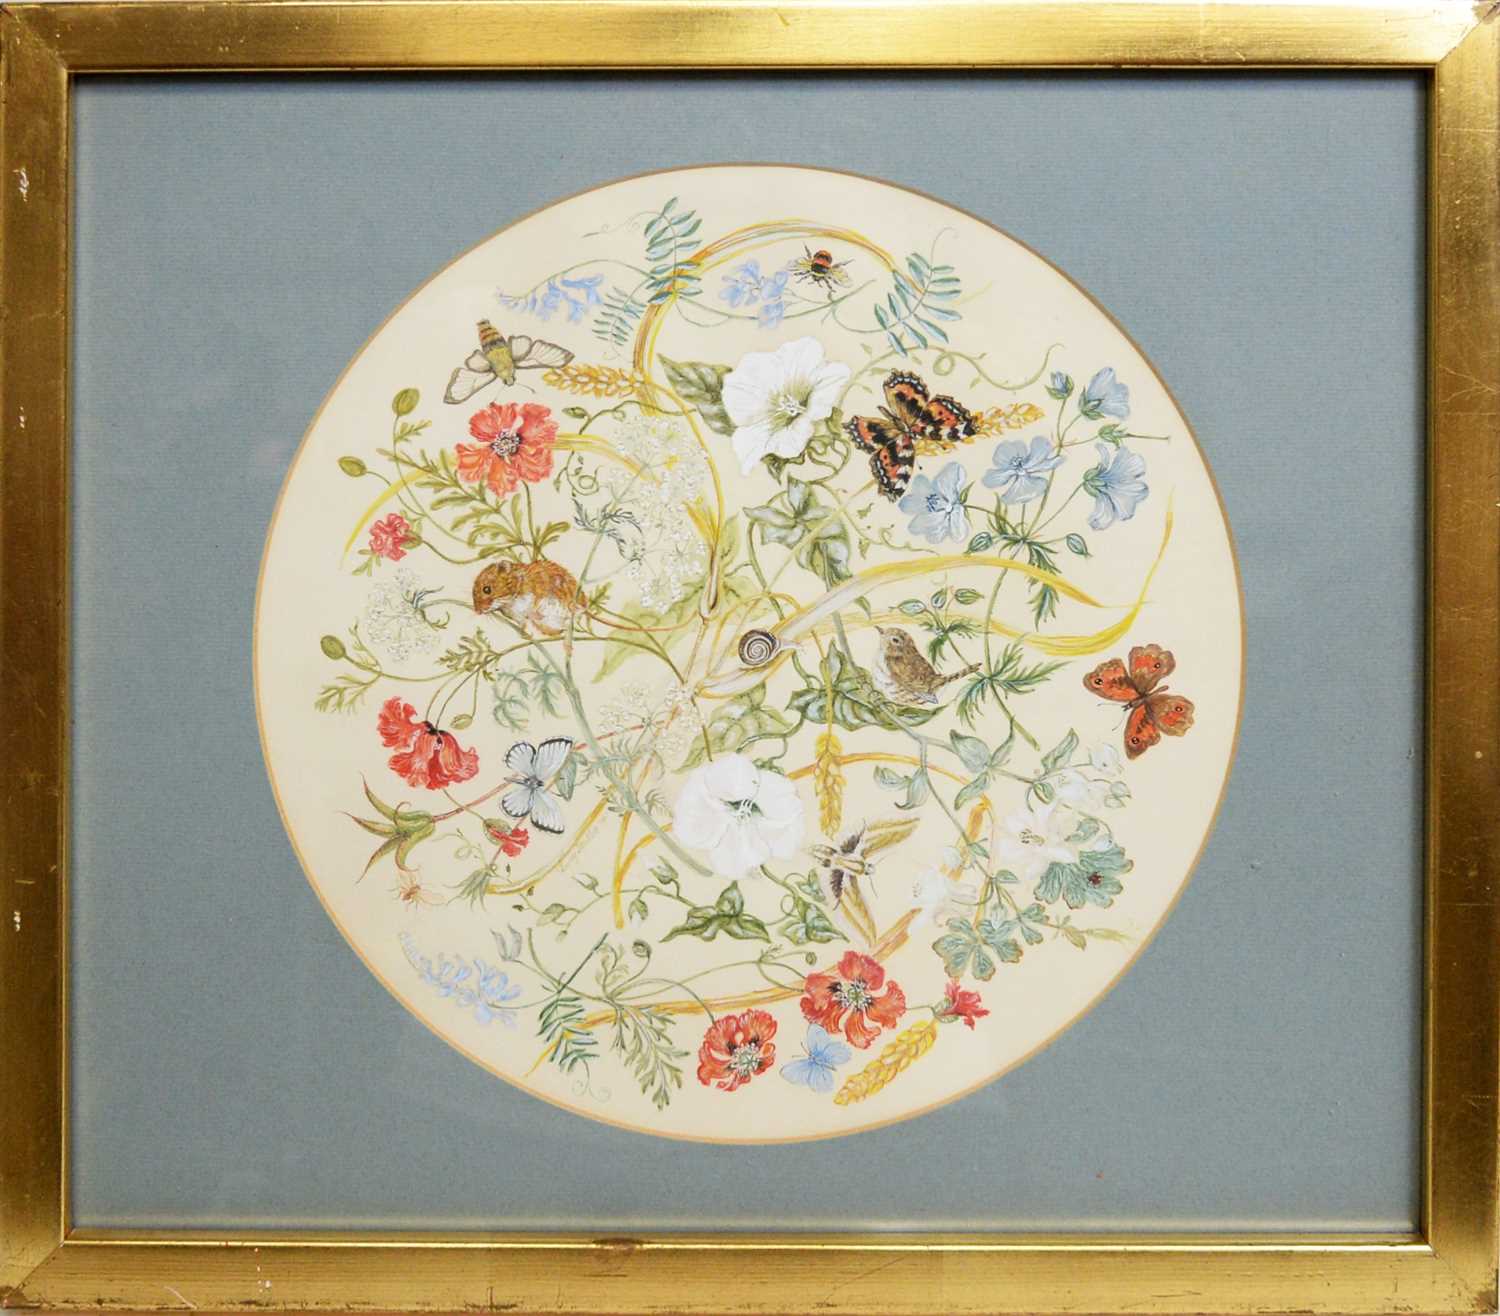 Lot 765 - Lucy Stubbs - Meadow Entwined; Flora, Fauna, Insects, and Birds of the Countryside | watercolour